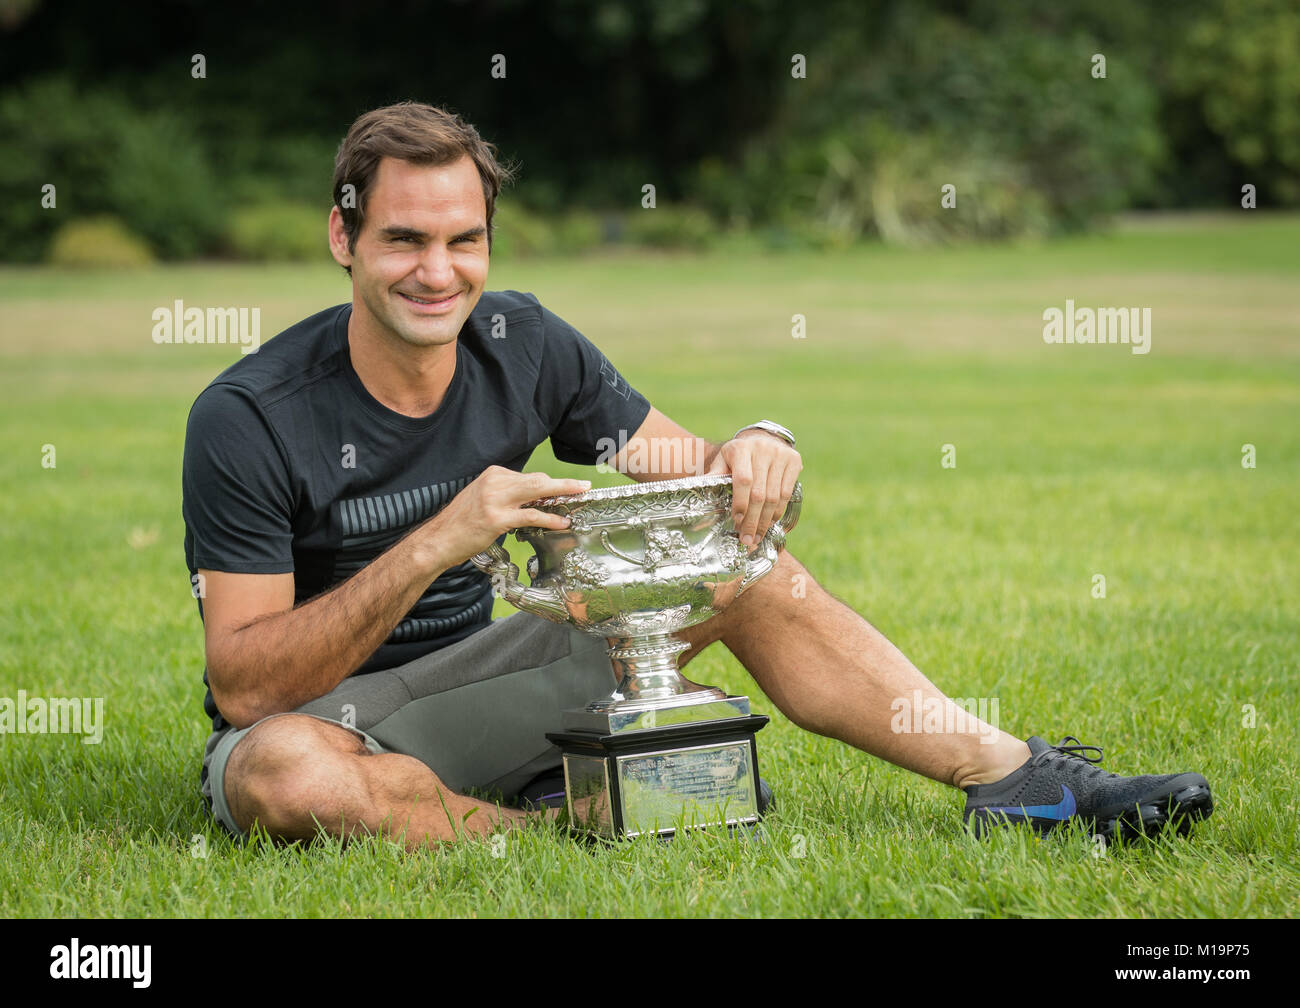 Melbourne, Australia. 29th Jan, 2018. Roger Federer of Switzerland poses with his Australian Open trophy, the Norman Brookes Challenge Cup at the Government House in Melbourne, Australia, Jan. 29, 2018. Credit: Zhu Hongye/Xinhua/Alamy Live News Stock Photo